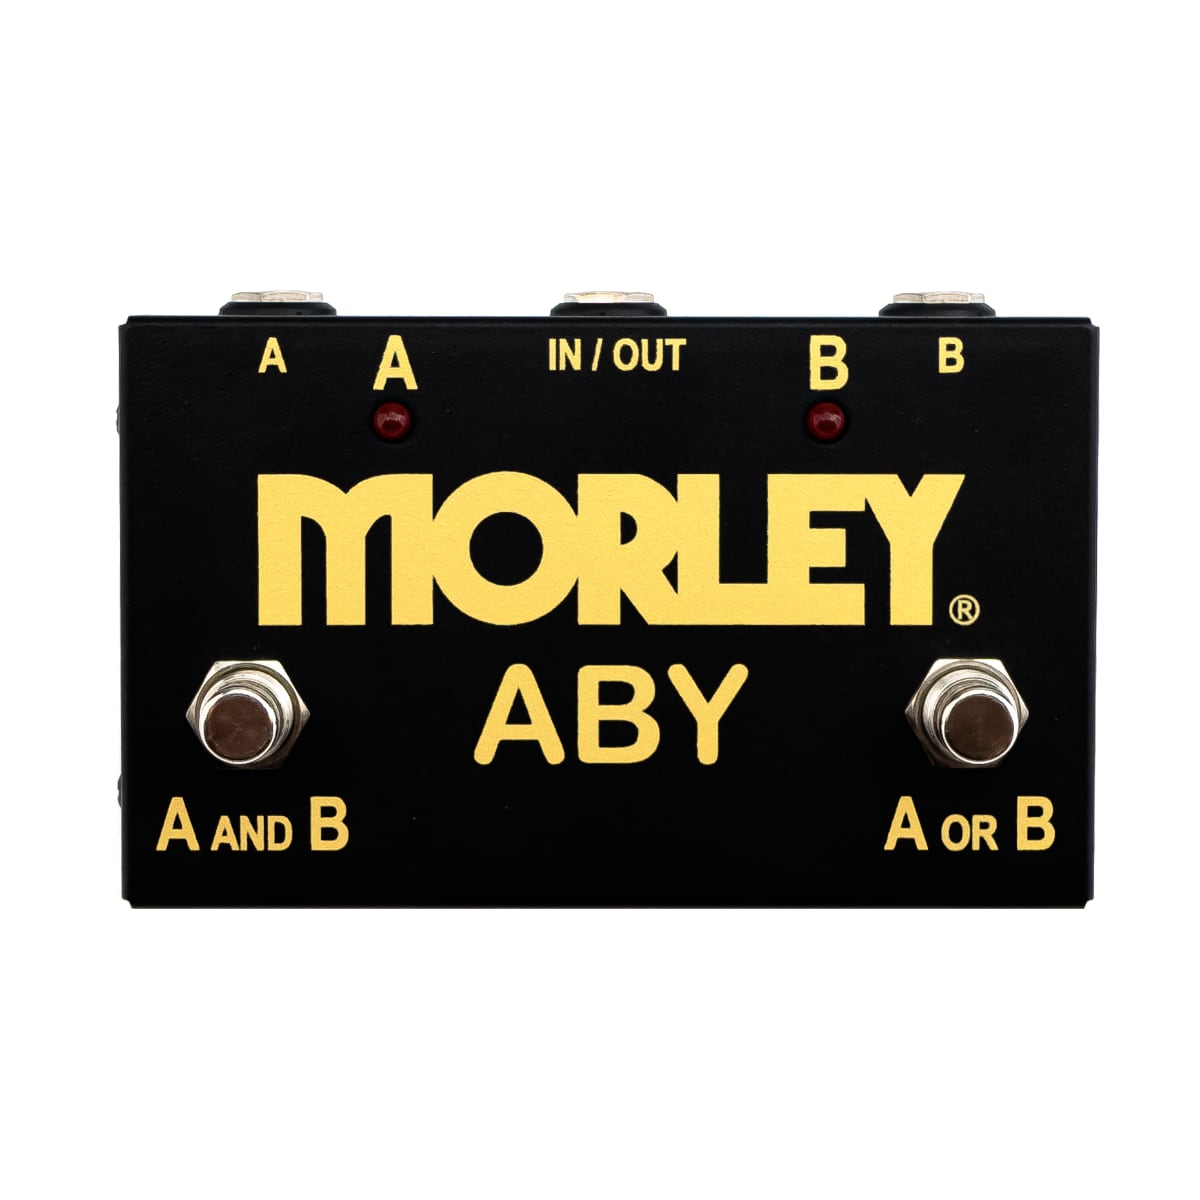 Morley Aby Gold Series Selector/Combiner